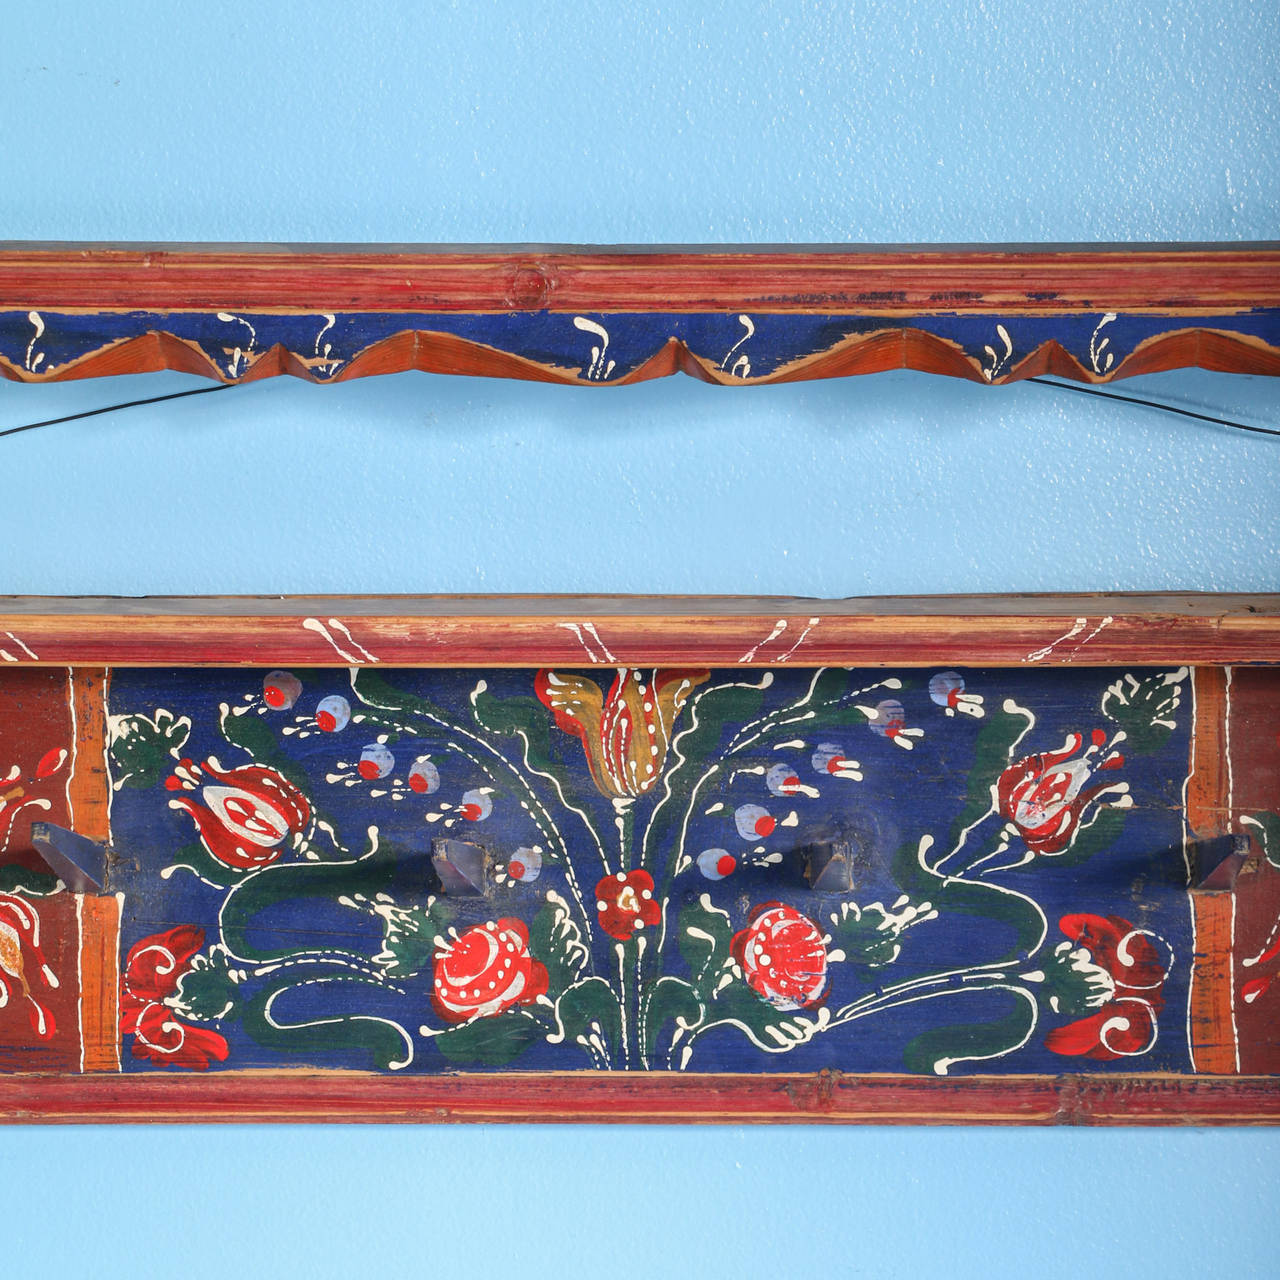 The striking blue, red, and green paint is all original on this painted rack from Romanian. It was painted in a traditional folk art style with flowers. This was originally a hanging plate rack; the plates would be displayed above while coffee mugs